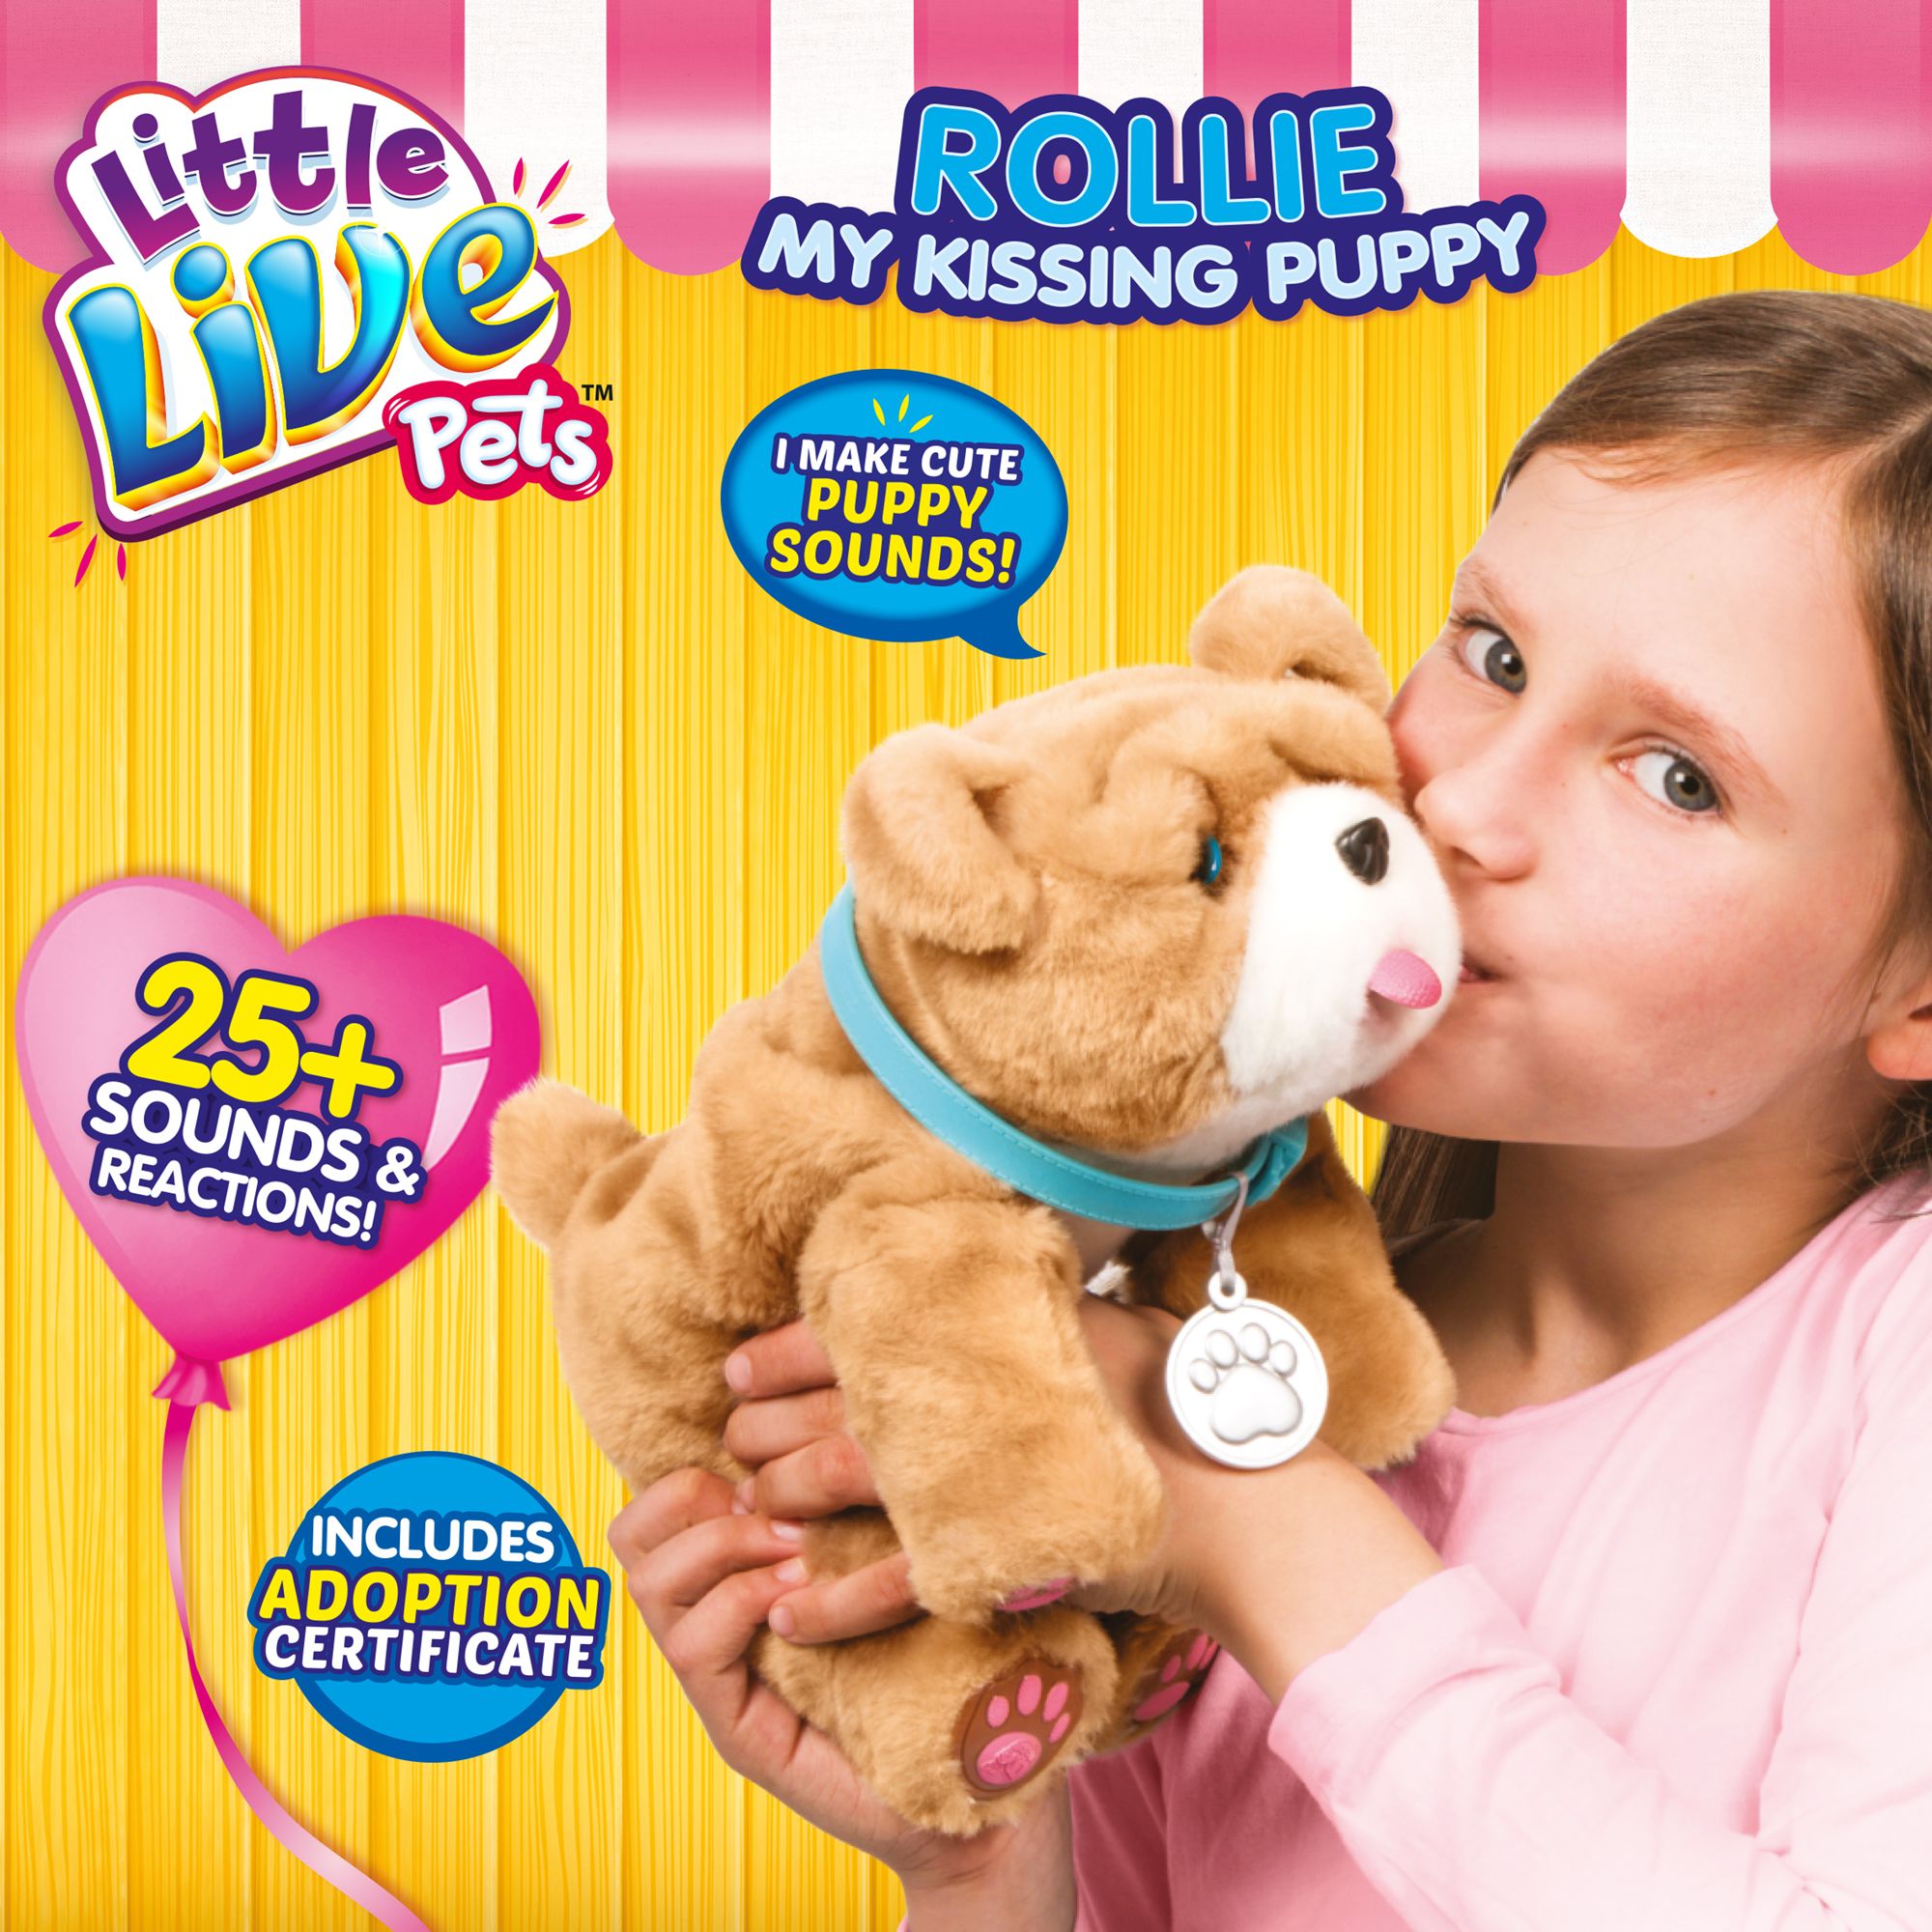 rollie kissing puppy toy